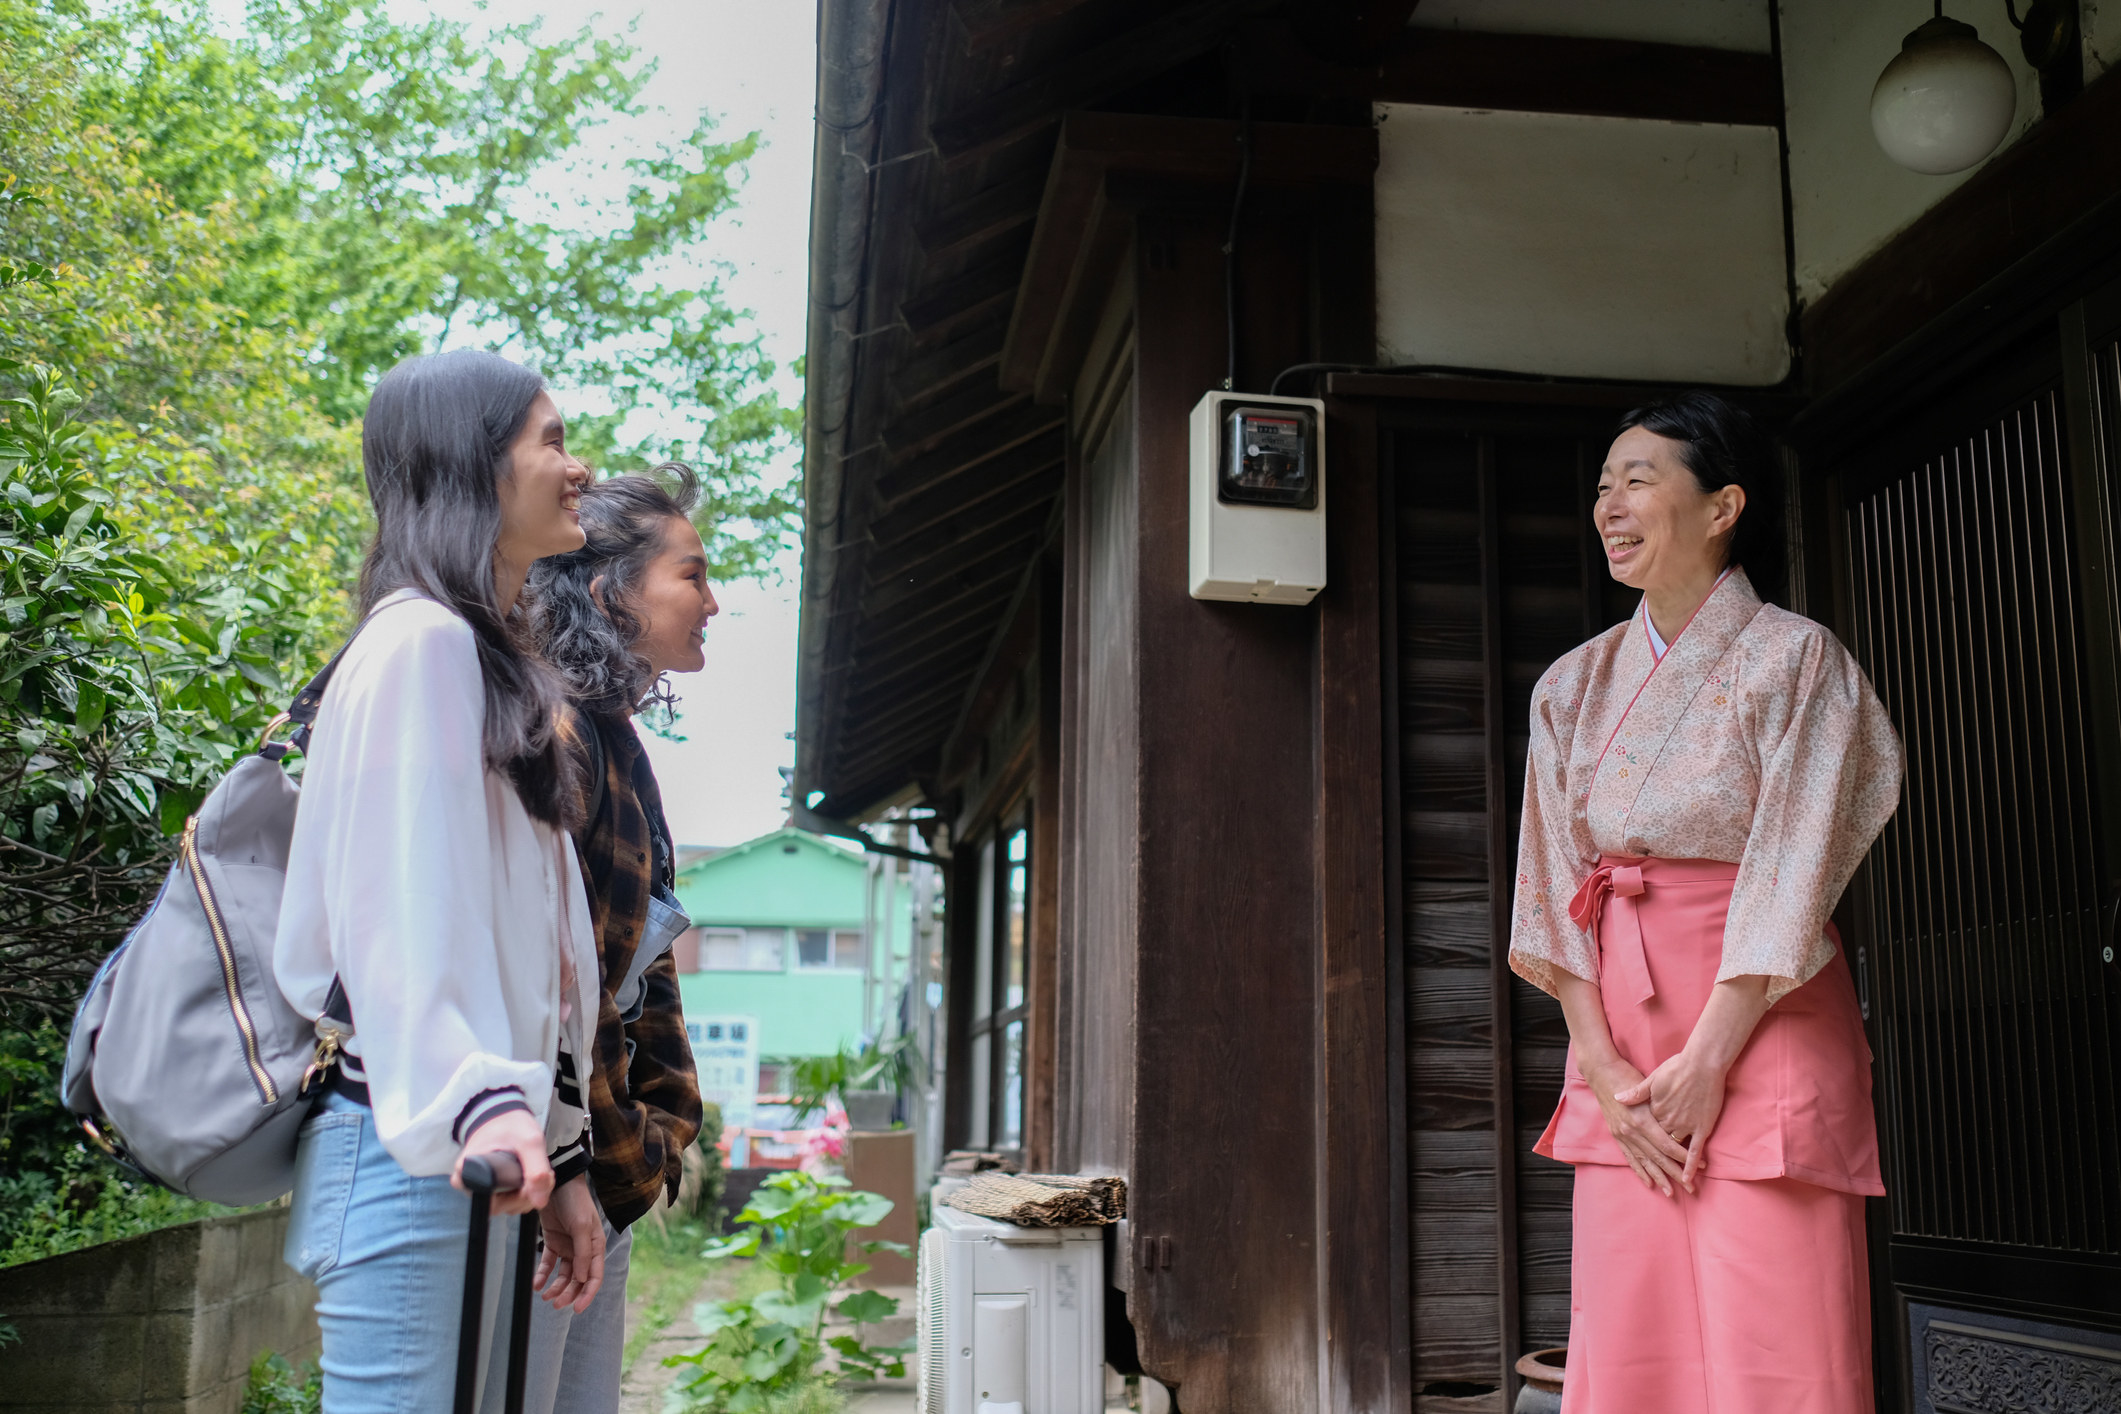 Two travelers meeting their host at a Japanese inn.